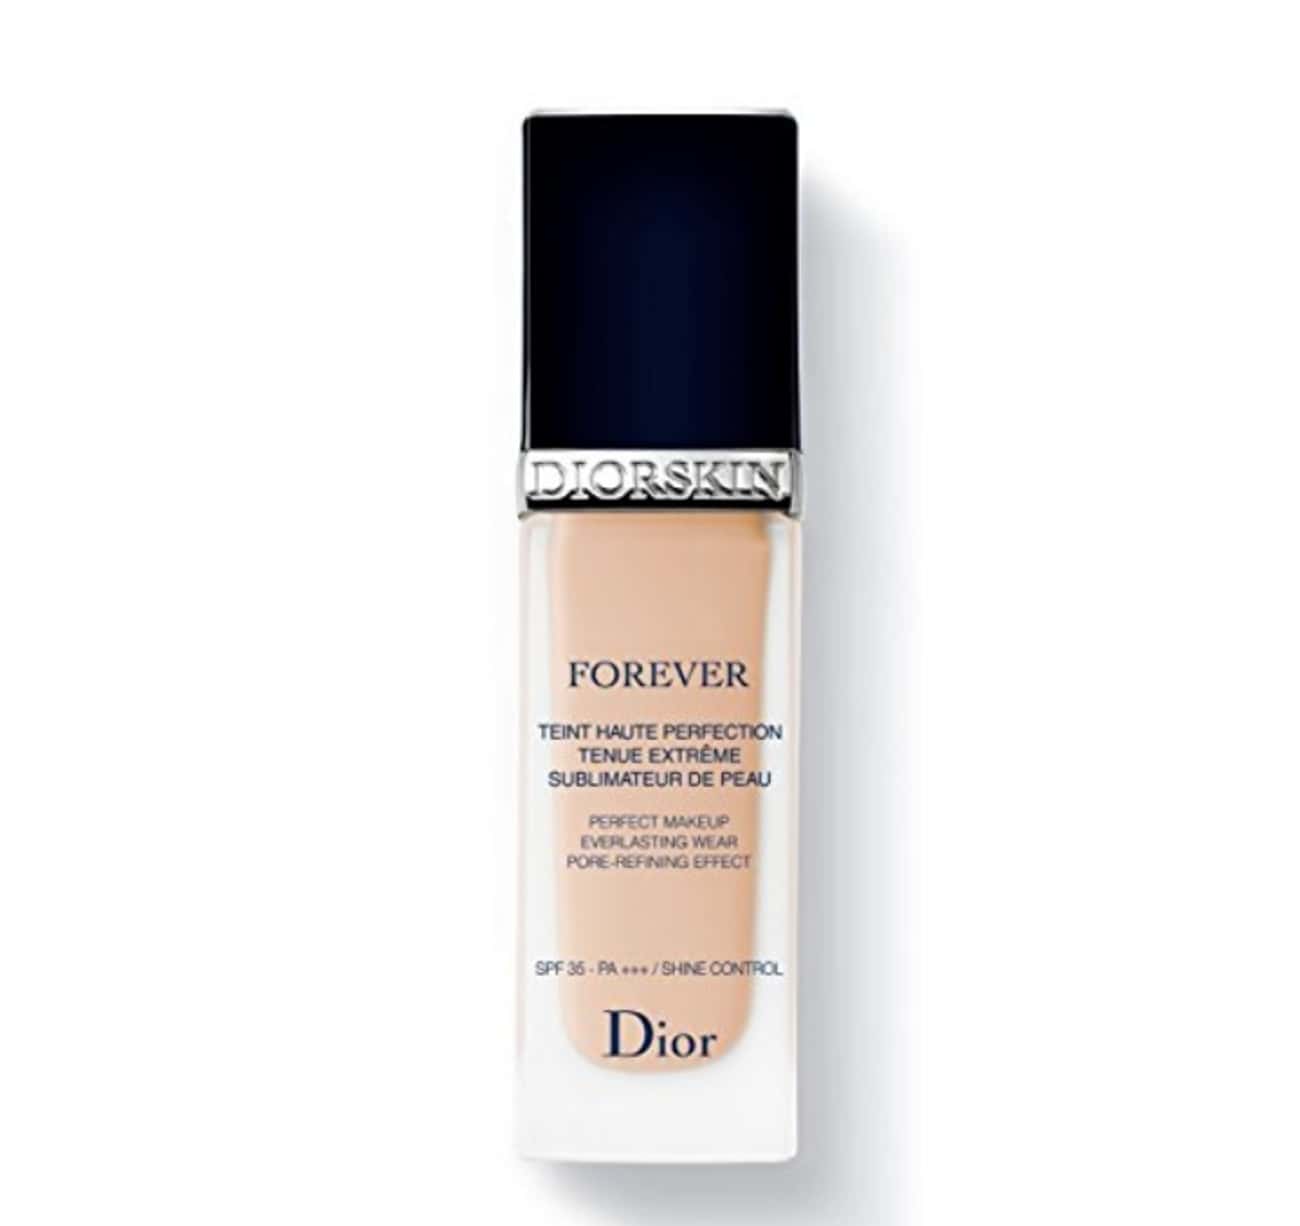 Diorskin Forever Perfect Makeup Everlasting Foundation By Dior